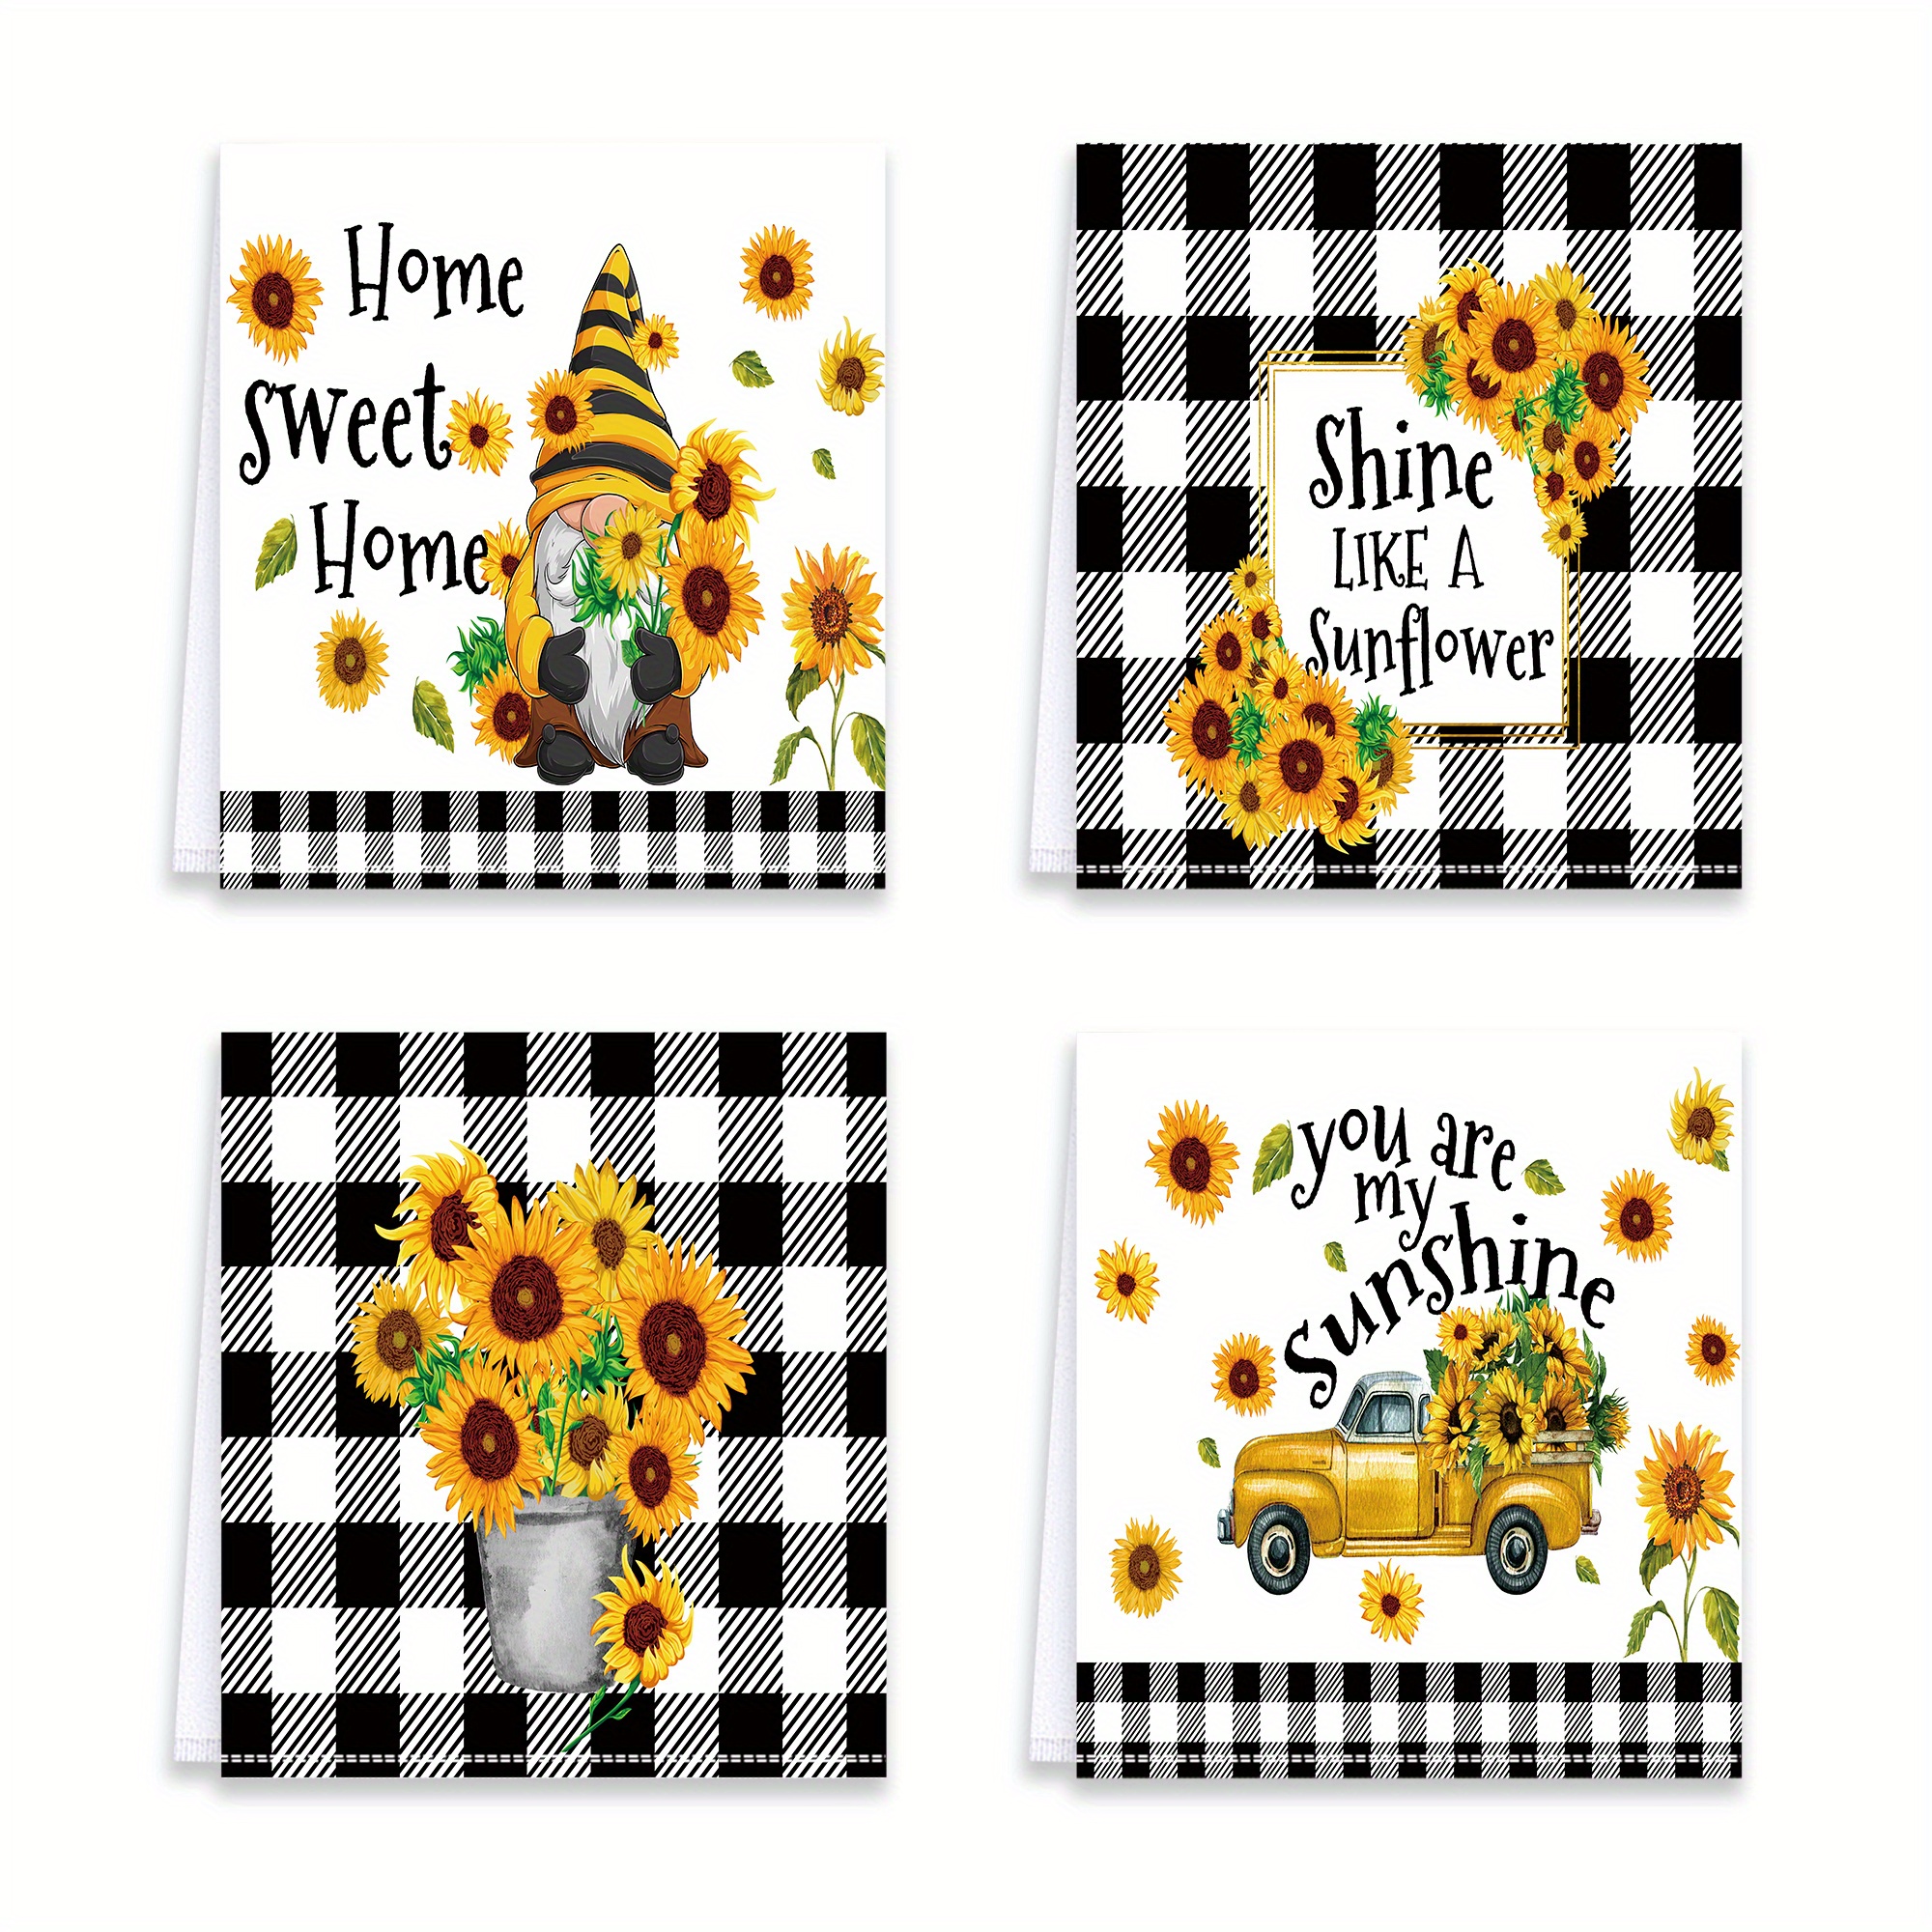 JOOCAR Kitchen Towels, Black and White Buffalo Plaid Yellow Gnome Bee Honey  Daisy 16x27.5 Inches Kitchen Towels for Kitchen Decor Housewarming Gift  Towels Set of 2 